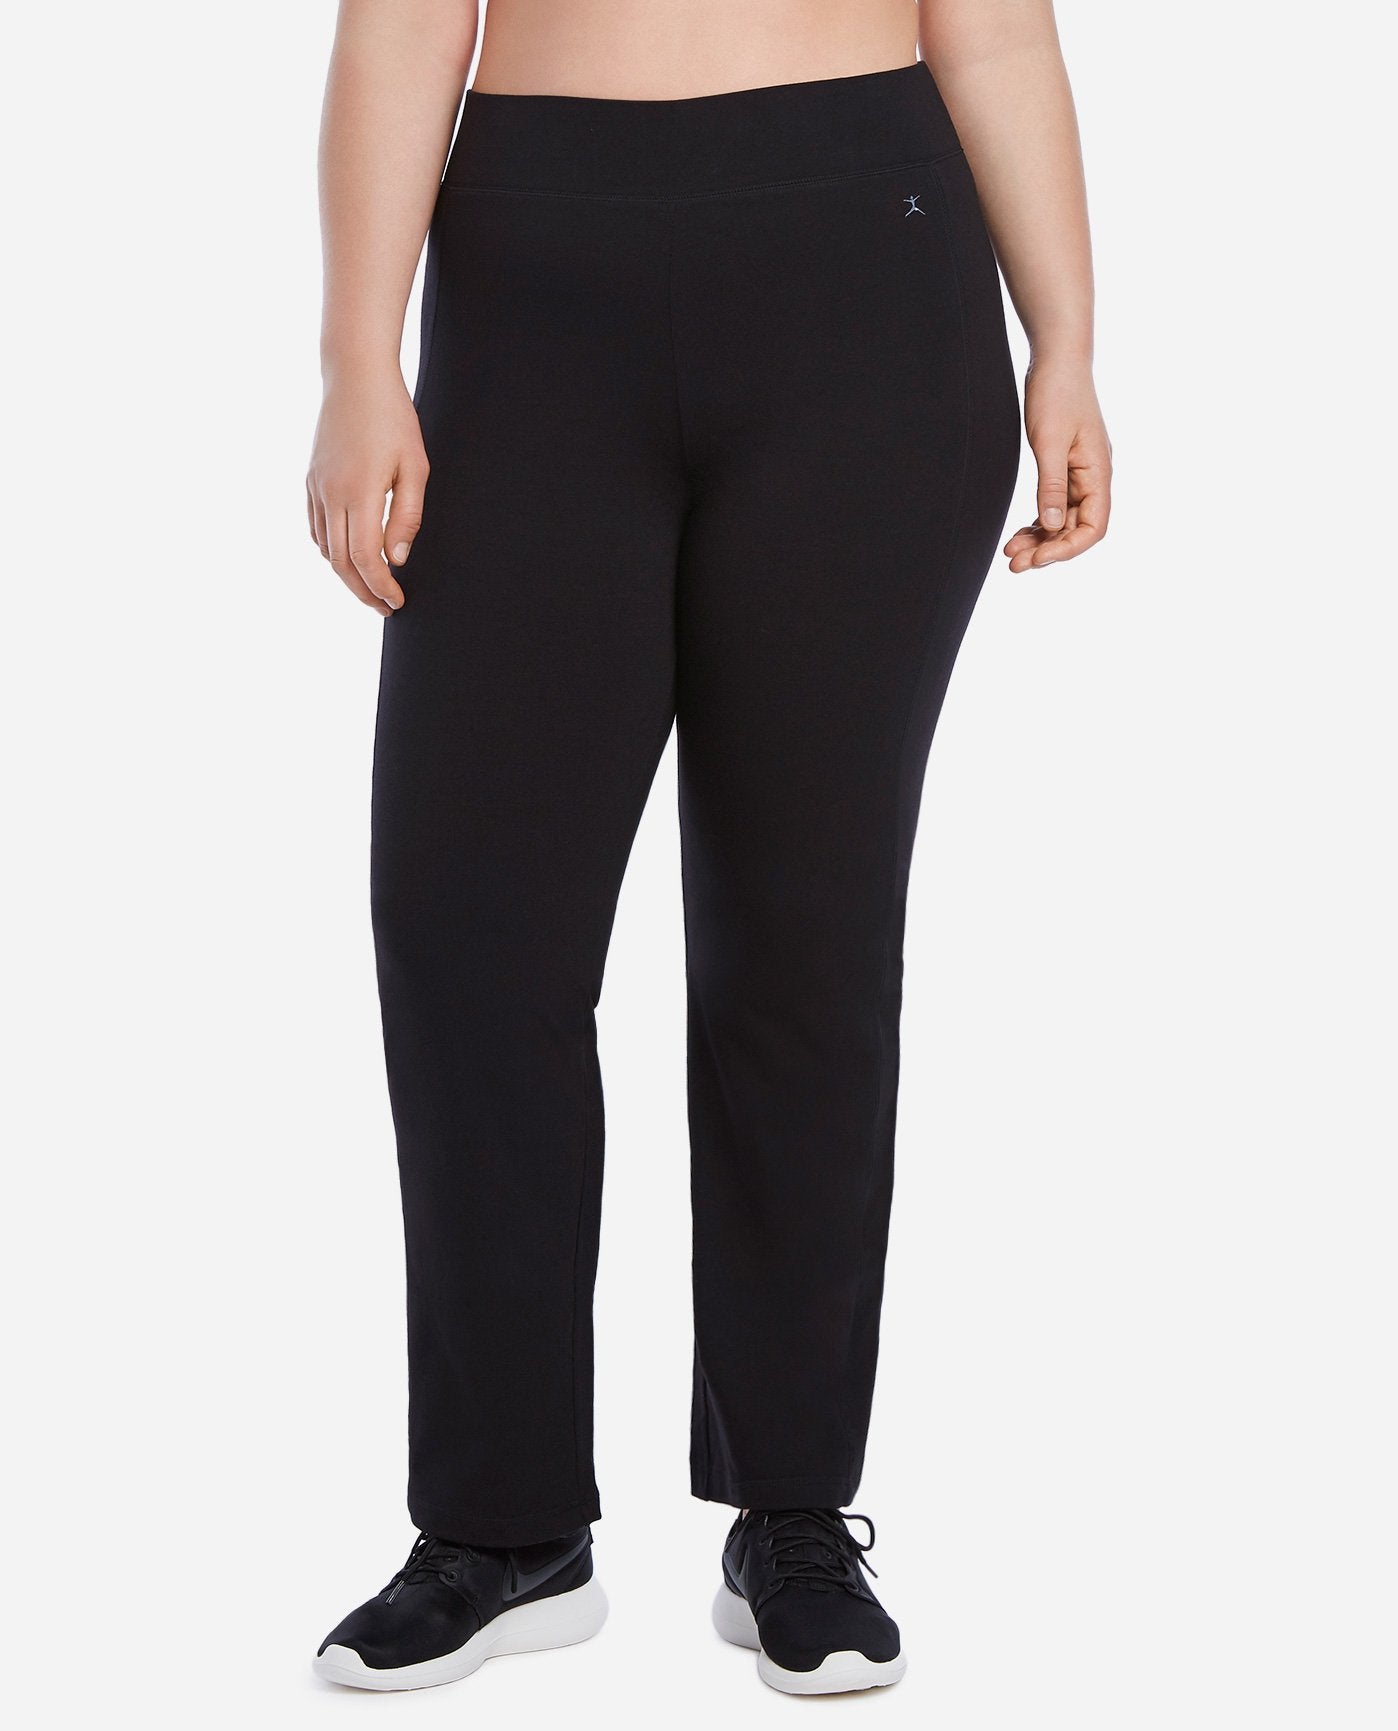 Danskin Now Women's Dri-More Core Athleisure Relaxed Fit Yoga Pants  Available In Regular And Petite 